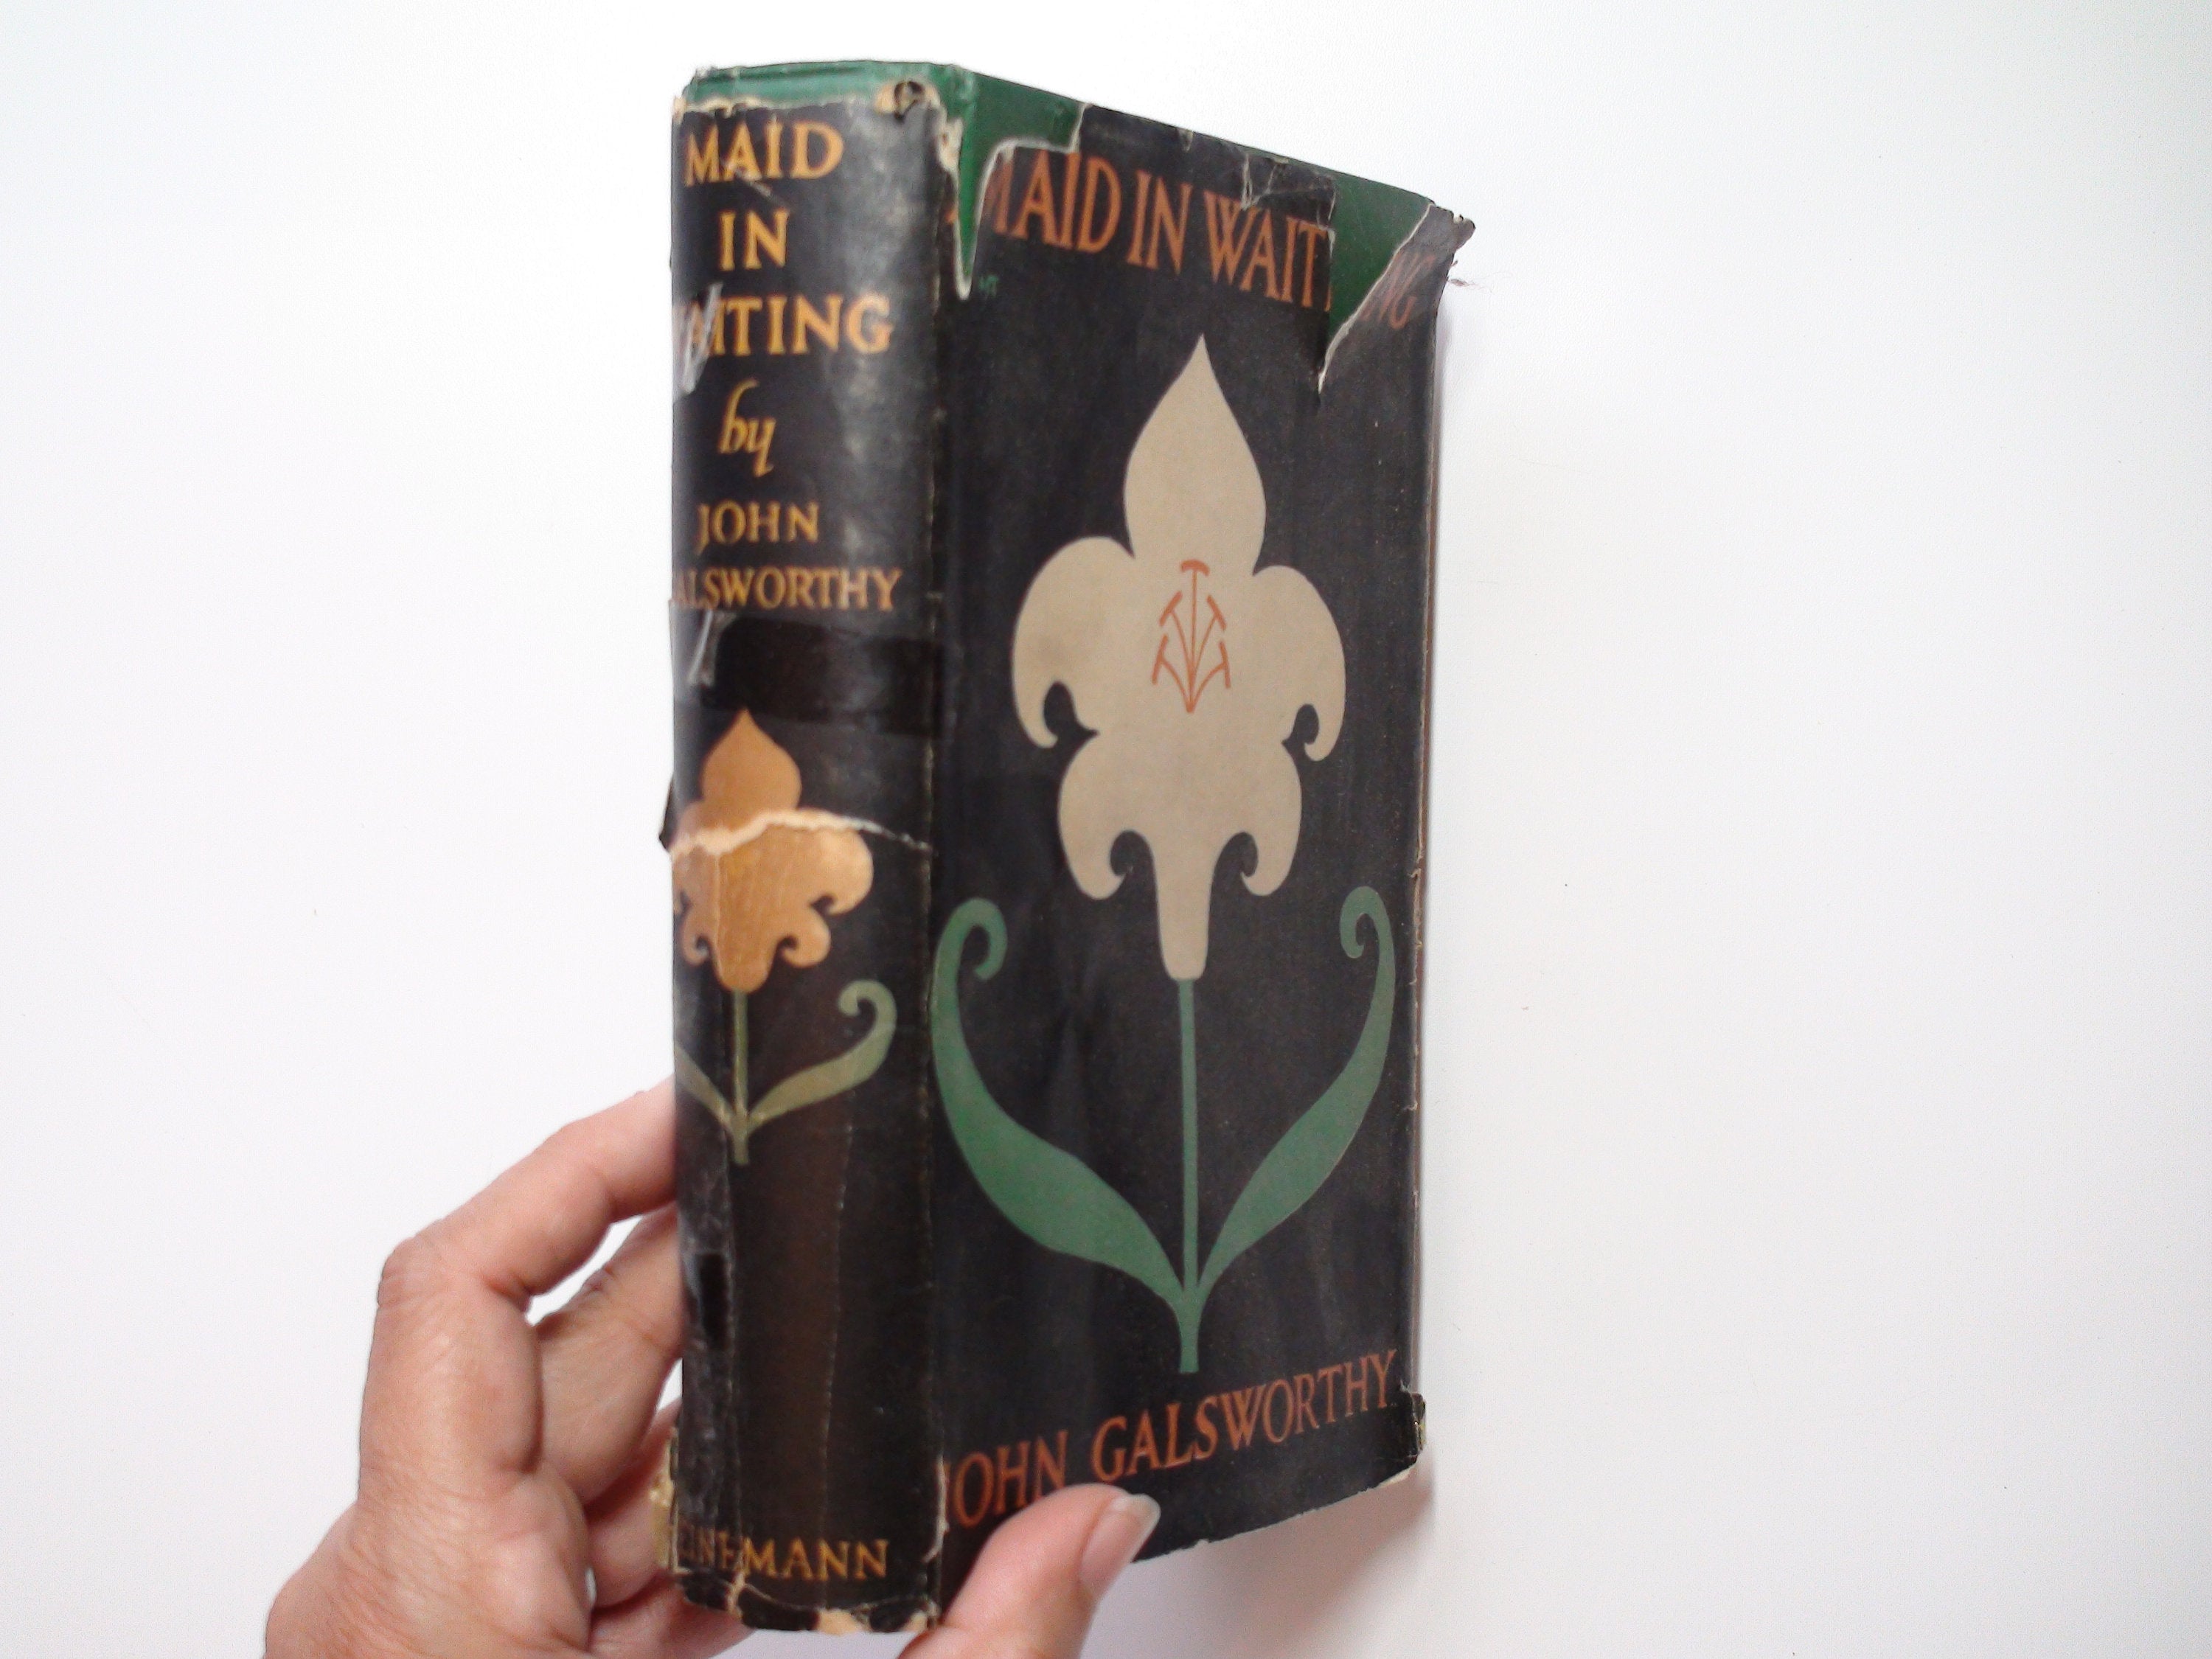 Maid in Waiting, by John Galsworthy, 1st Ed, Hardcover w/ D/J, 1931